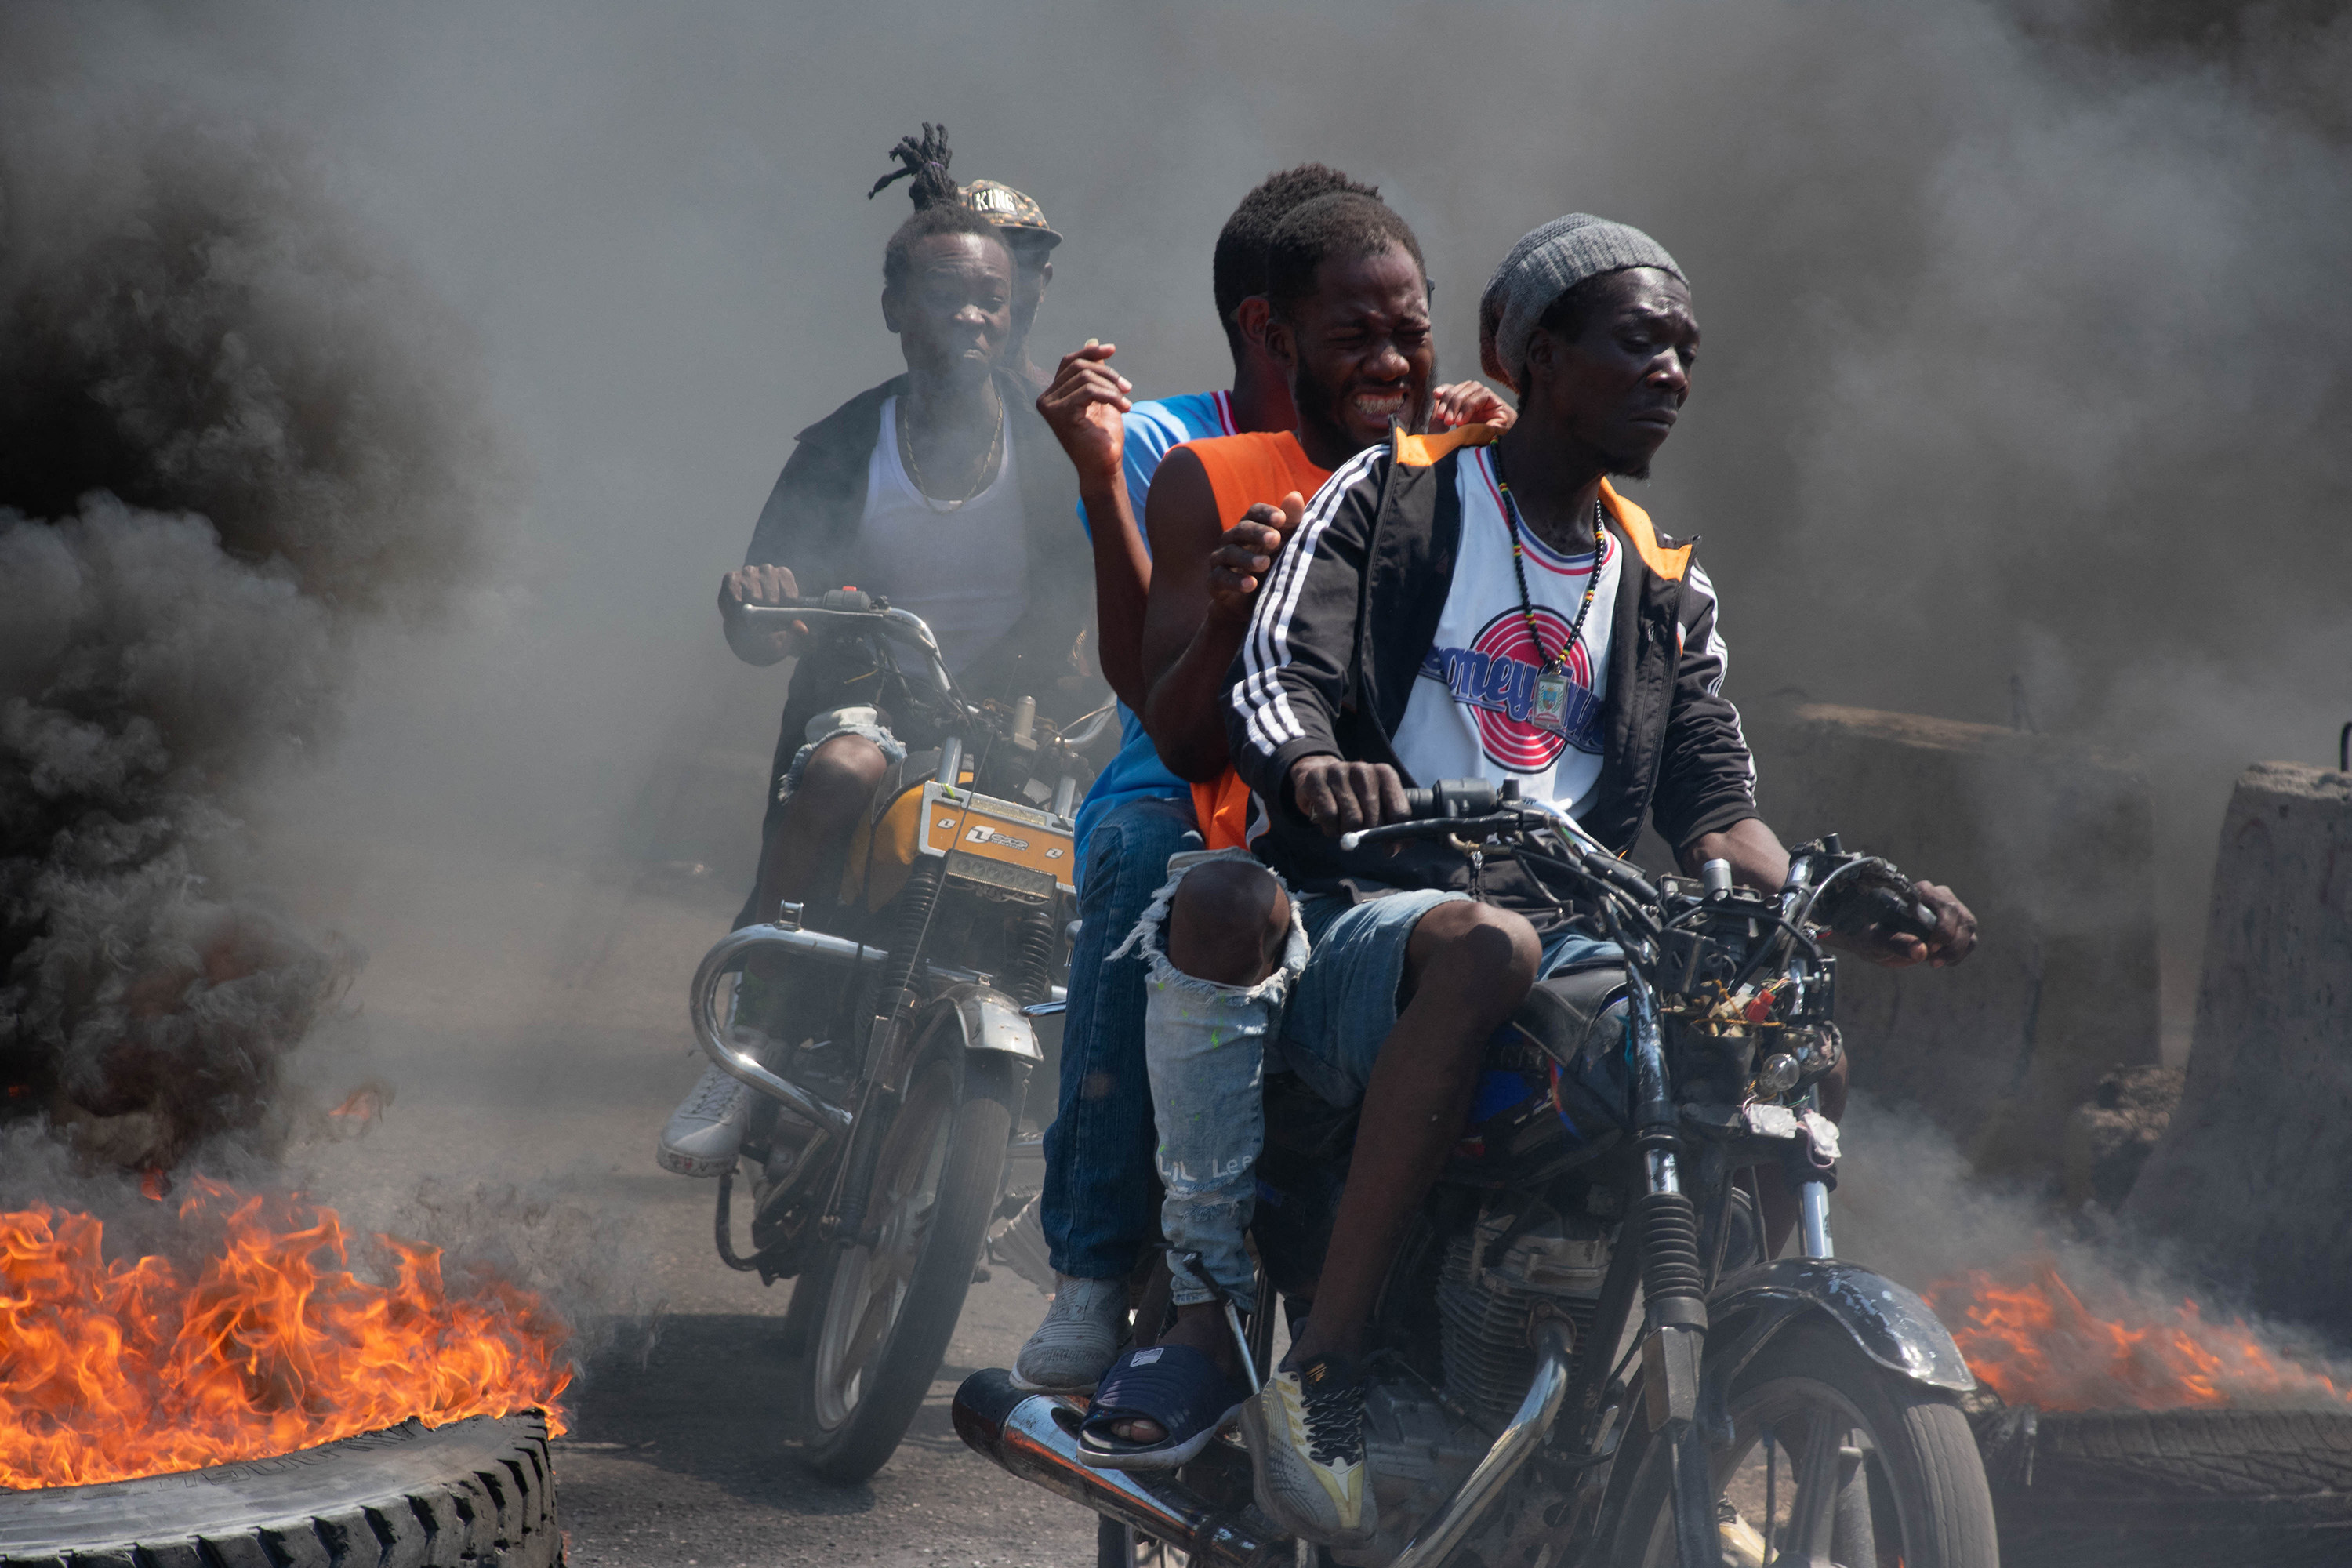 Men on motorcycles drive past burning tyres in Port-au-Prince, Haiti. Photo: TNS